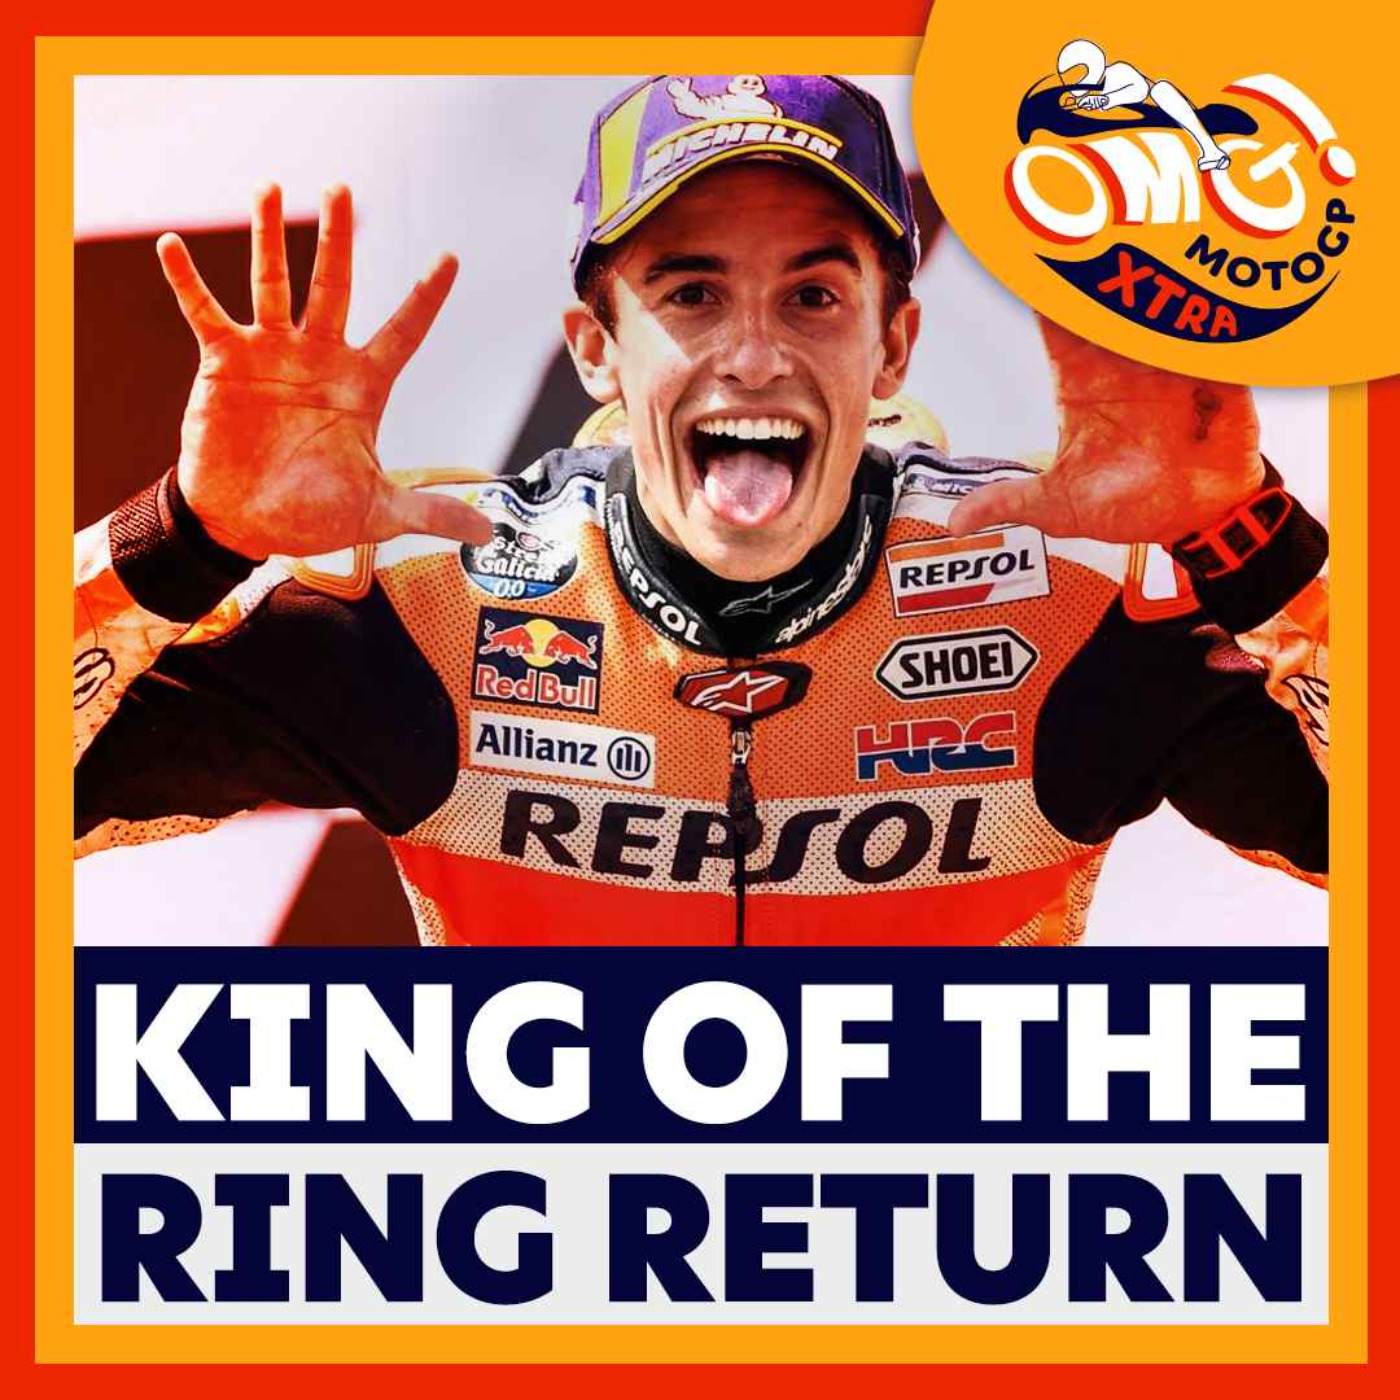 Will the King of the Ring Return? | German GP Preview